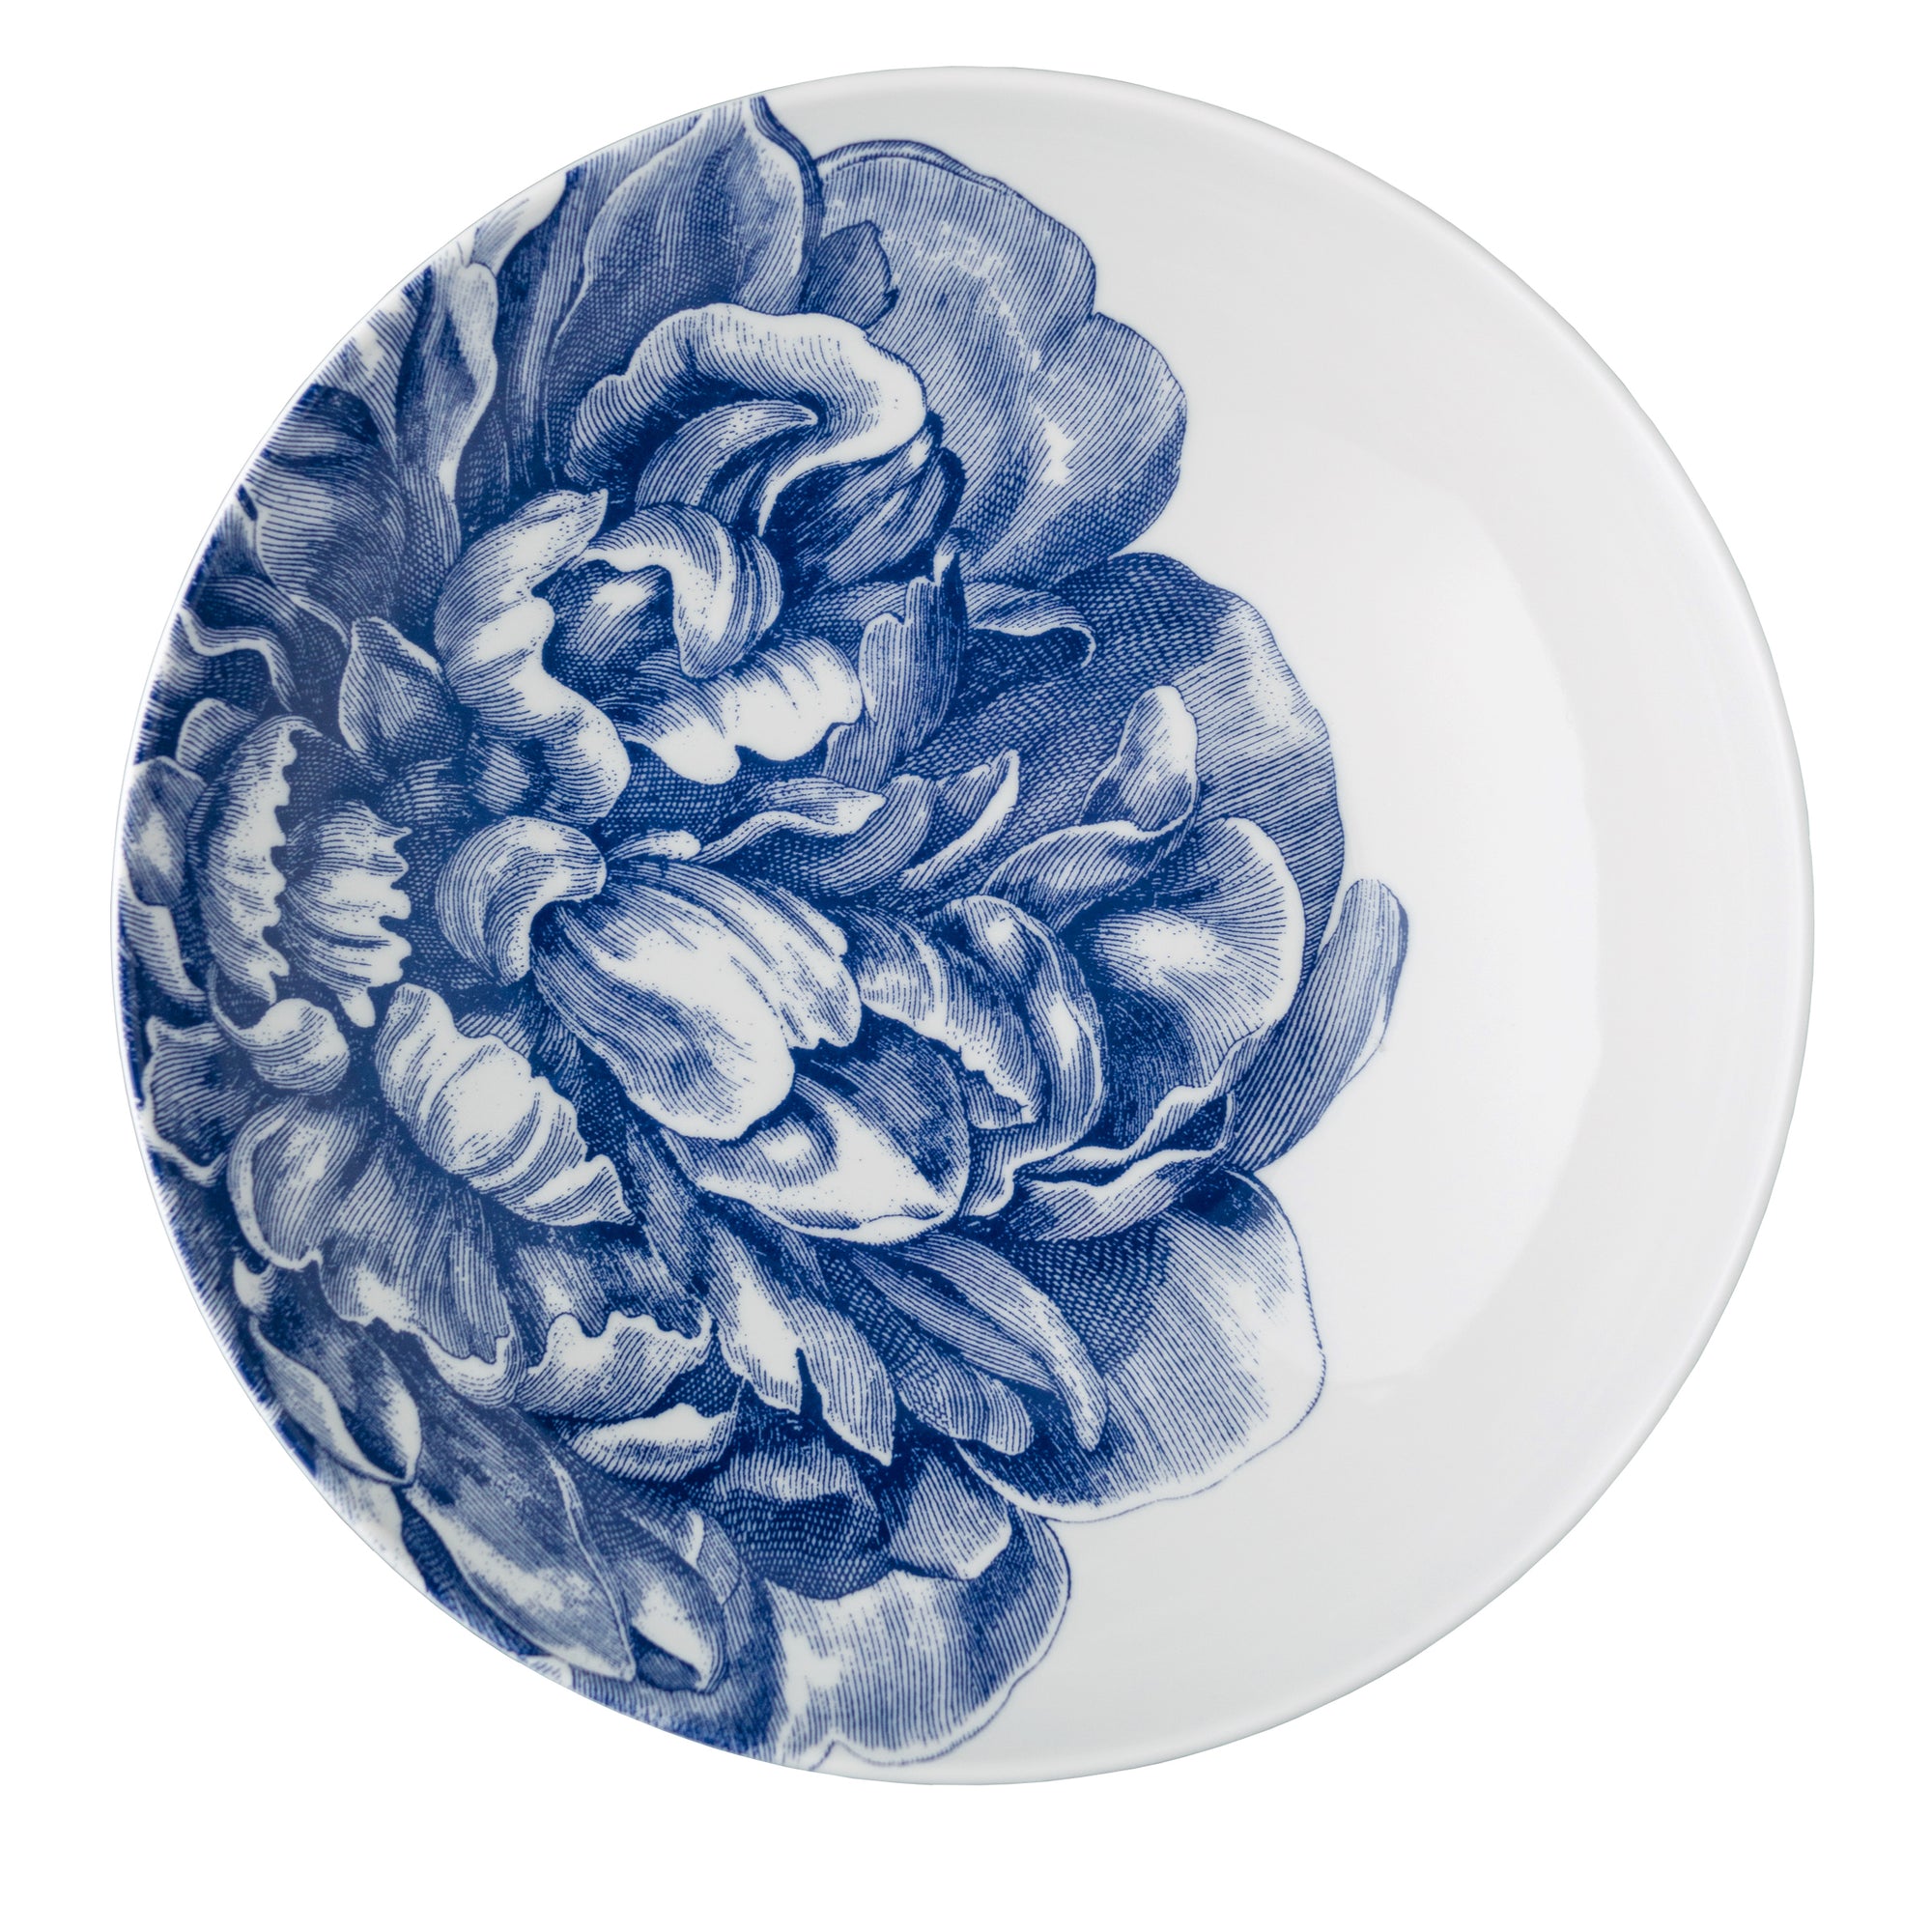 A Caskata Artisanal Home Peony Wide Serving Bowl with a detailed blue floral design on a white background, viewed from above.